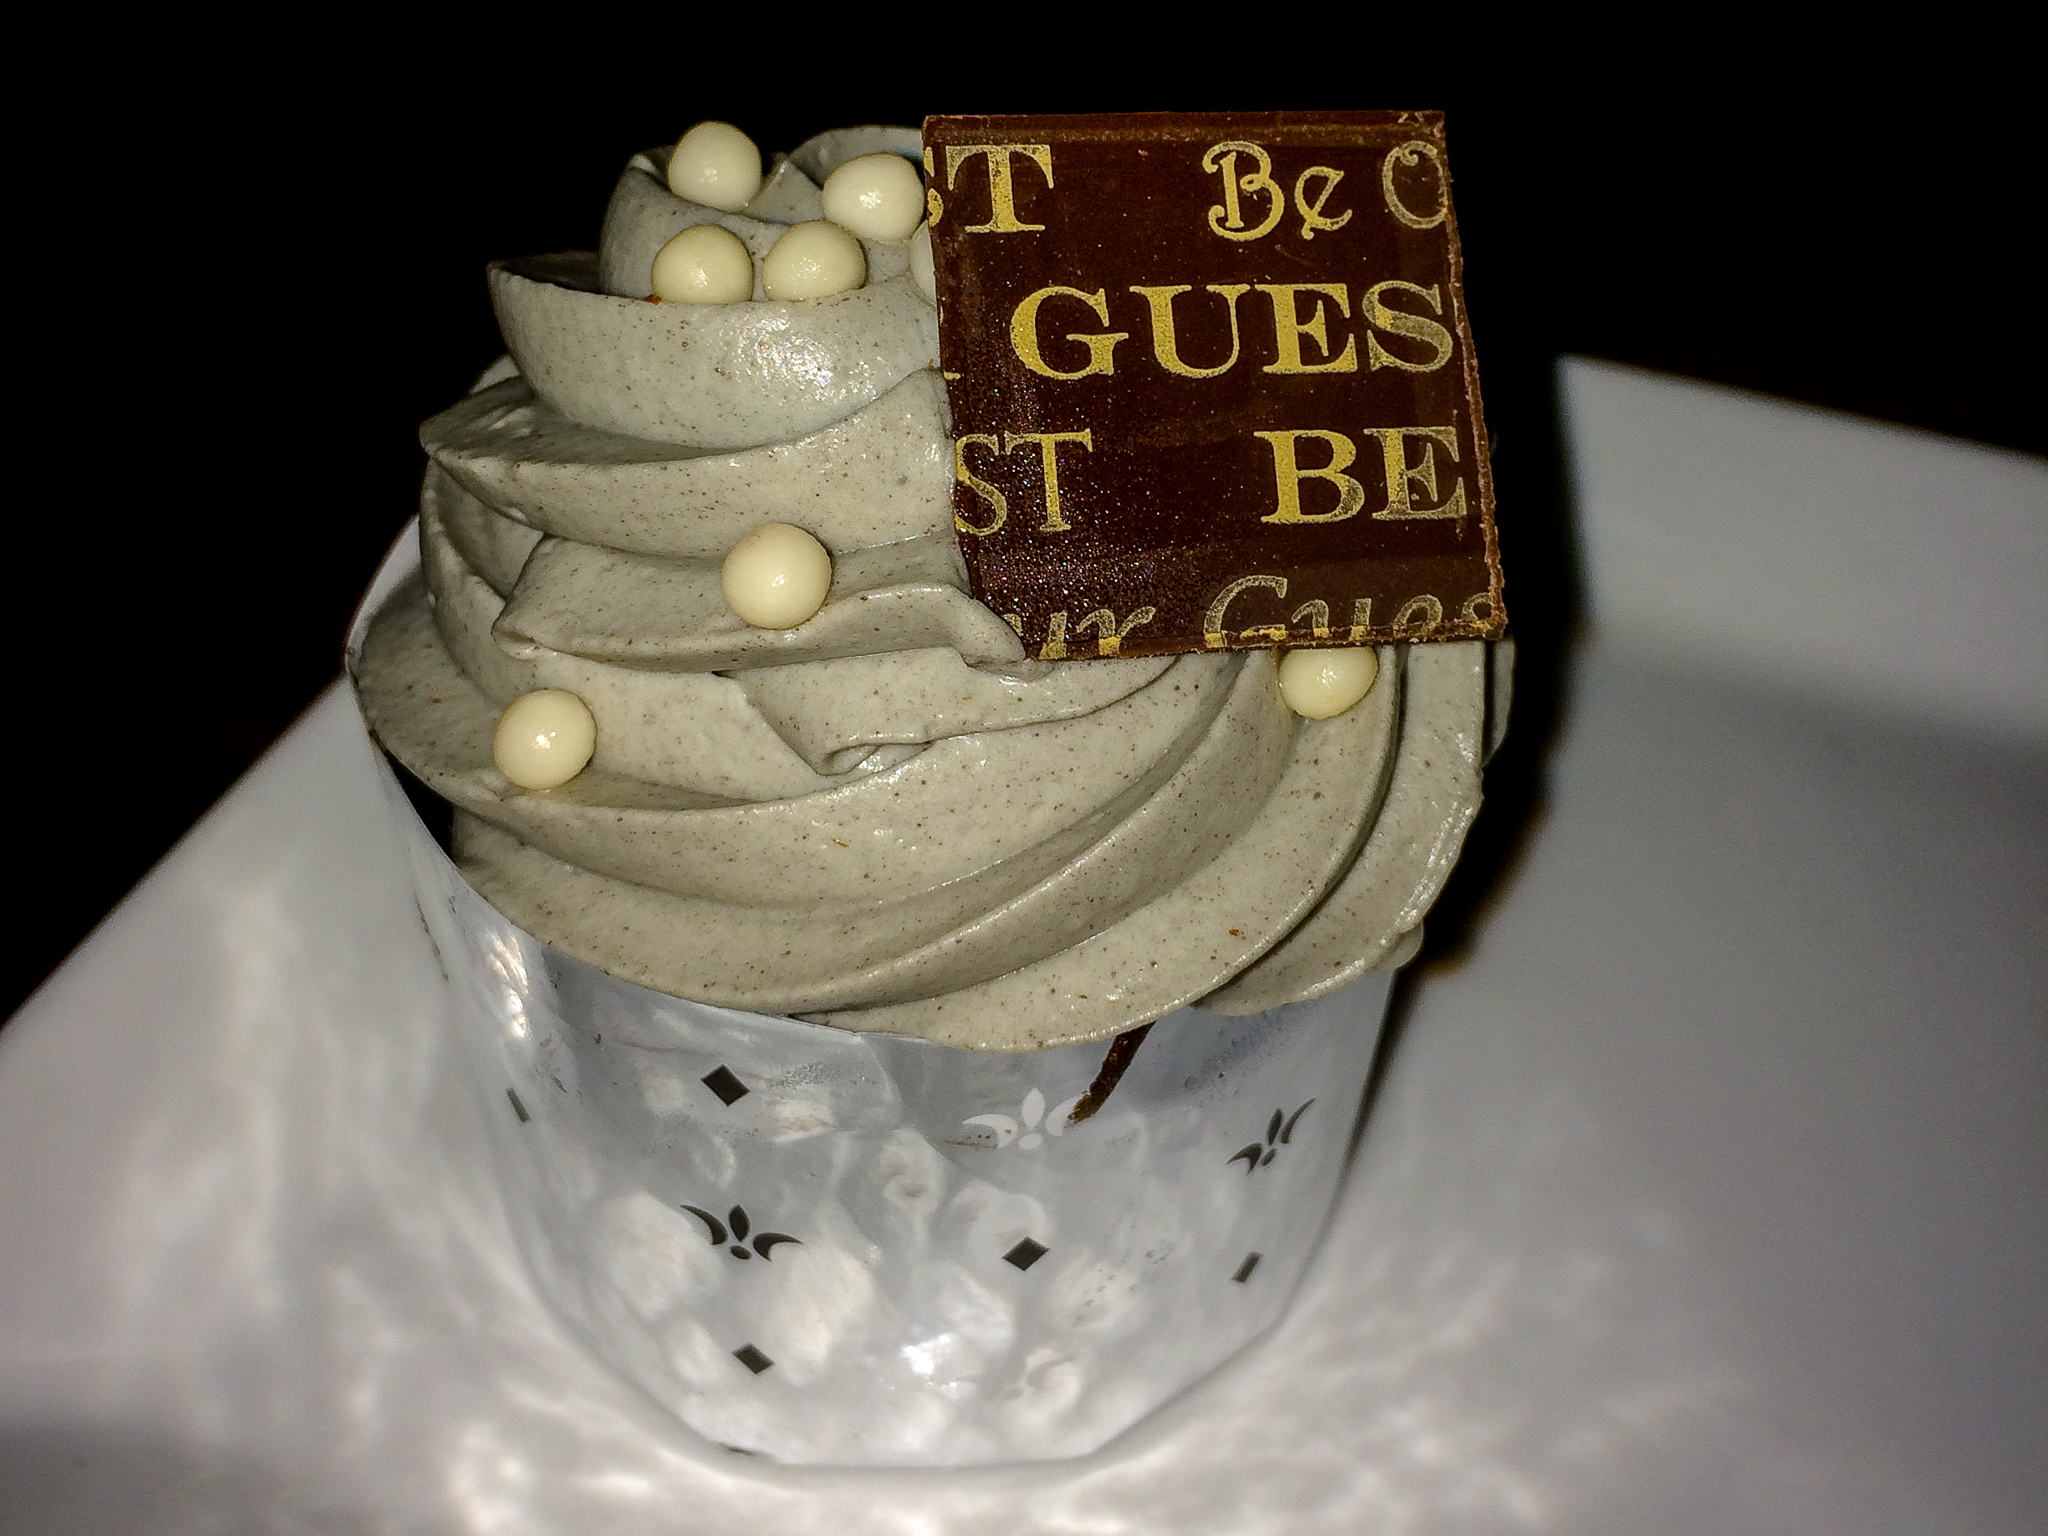 Grey Stuff Cupcake from Be Our Guest